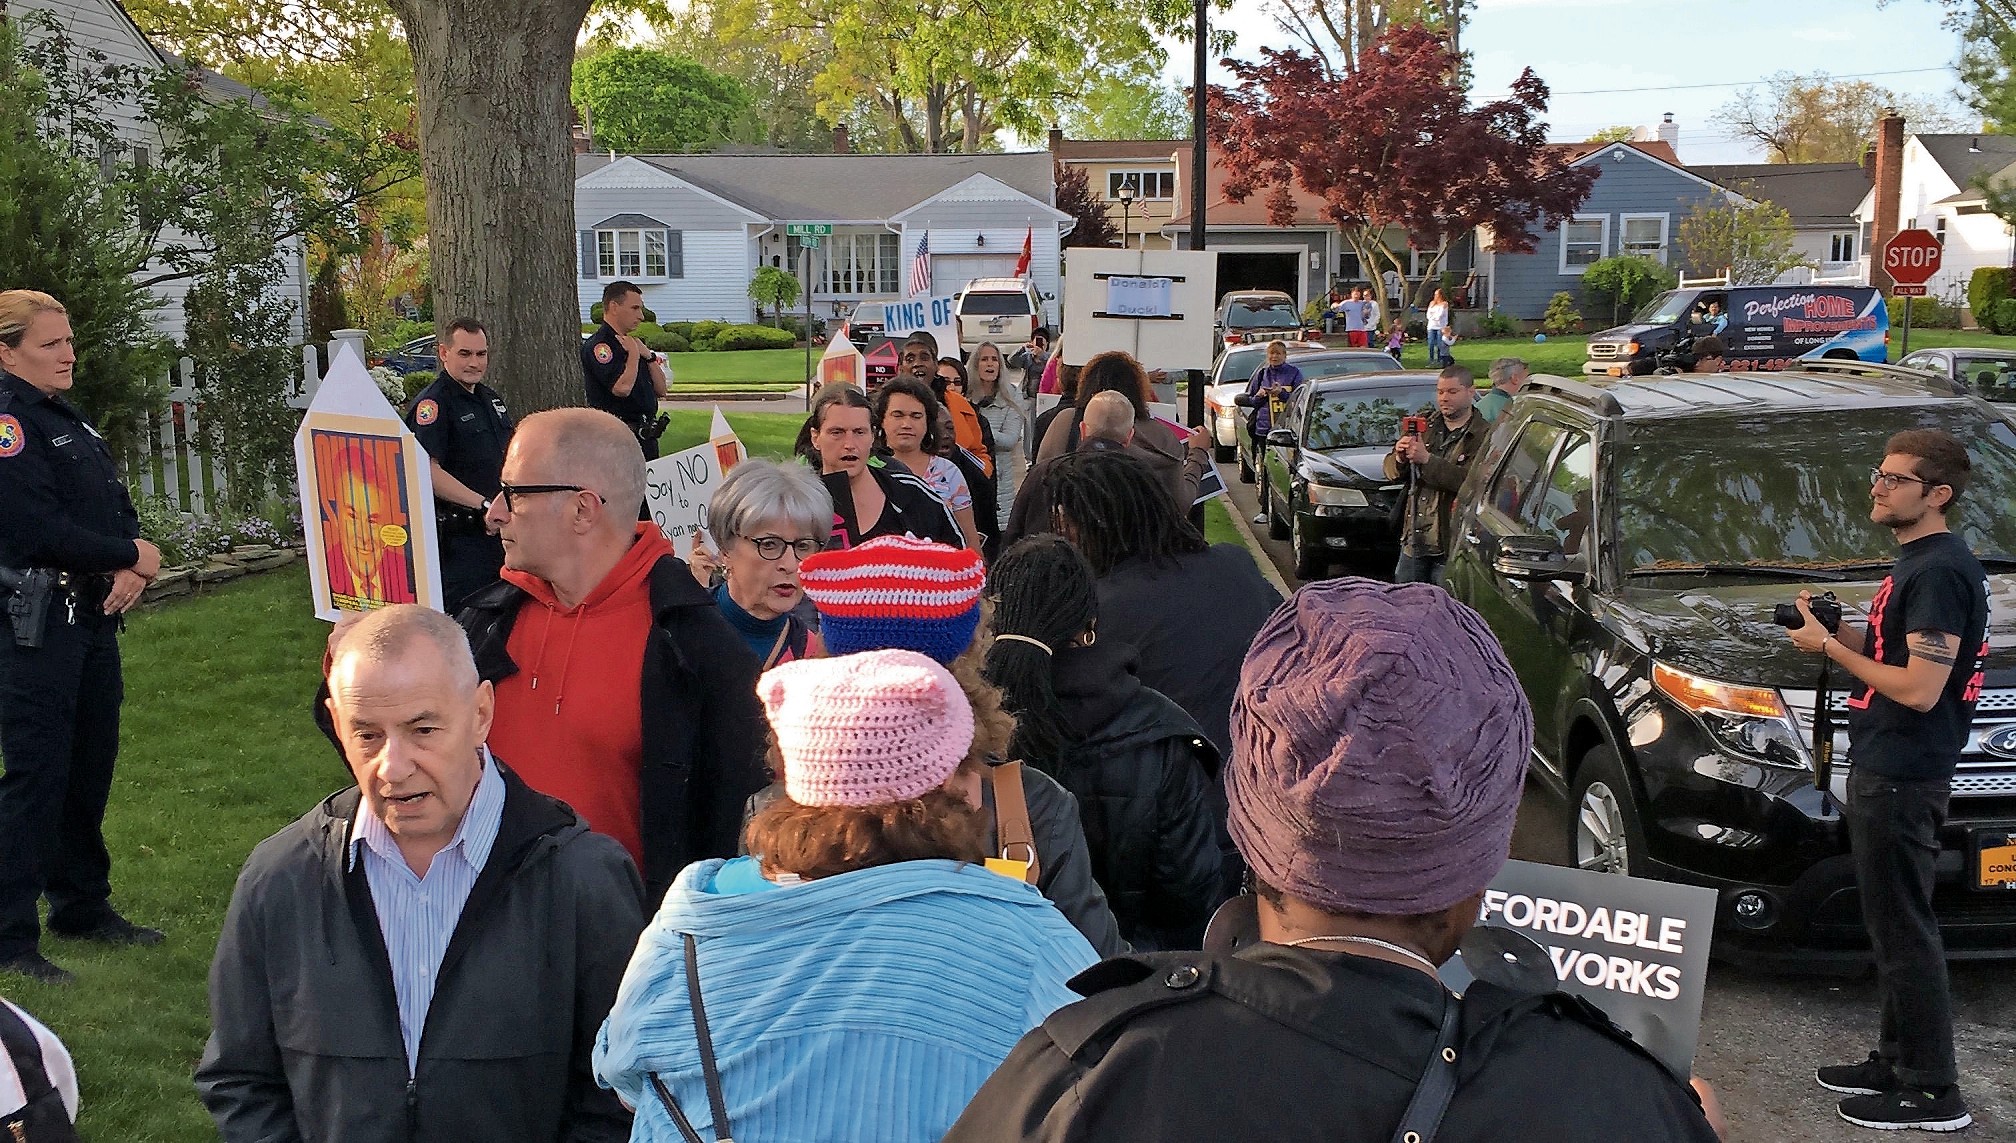 The demonstration was confined to the sidewalk on Roth Road, where King lives. The congressman was not home when protesters gathered outside his house.